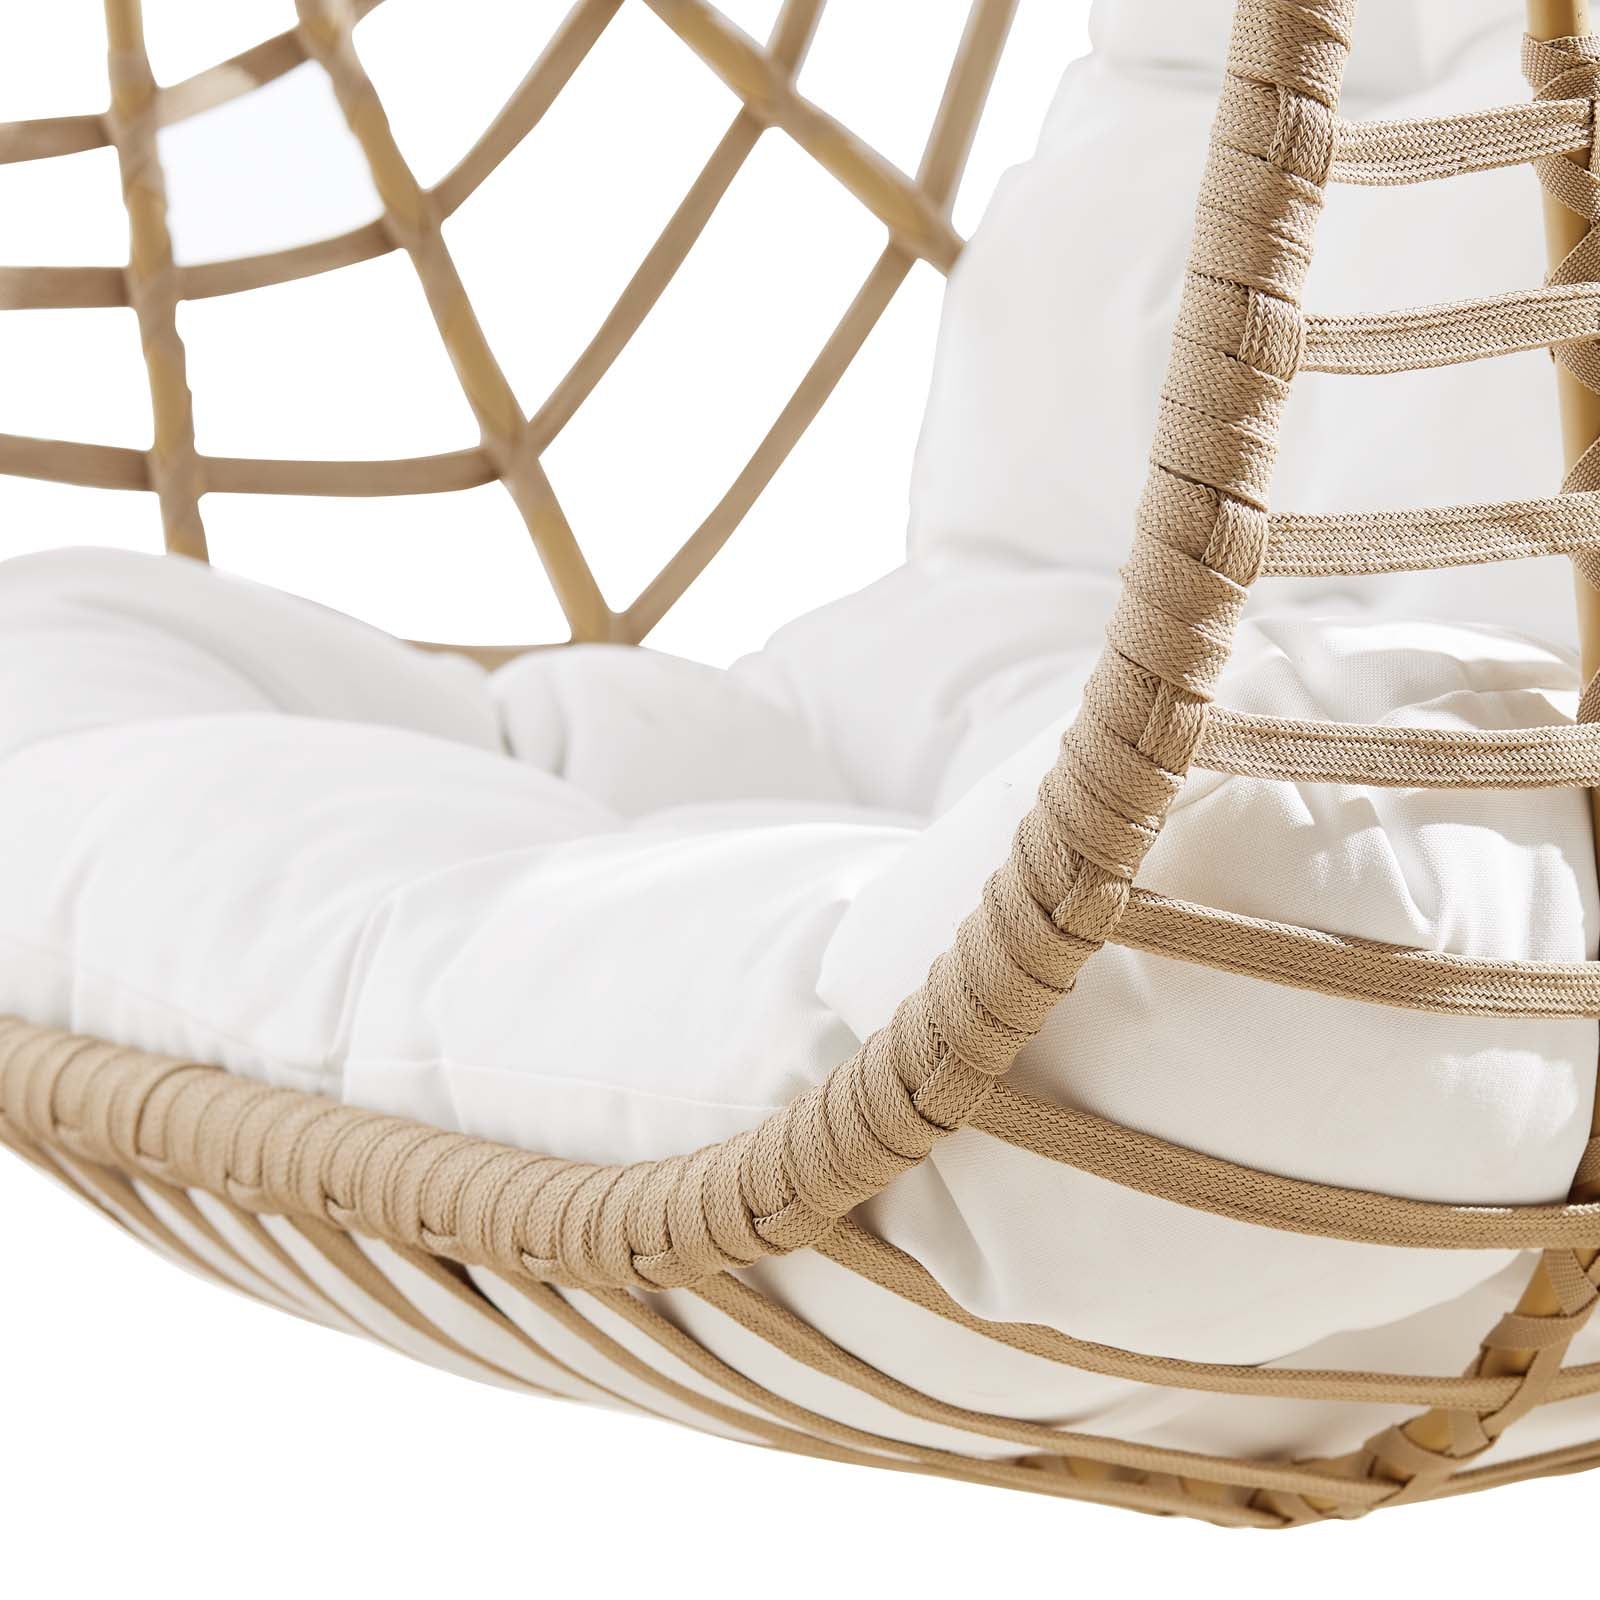 Amalie Wicker Rattan Outdoor Patio Rattan Swing Chair without Stand-Outdoor Chair-Modway-Wall2Wall Furnishings